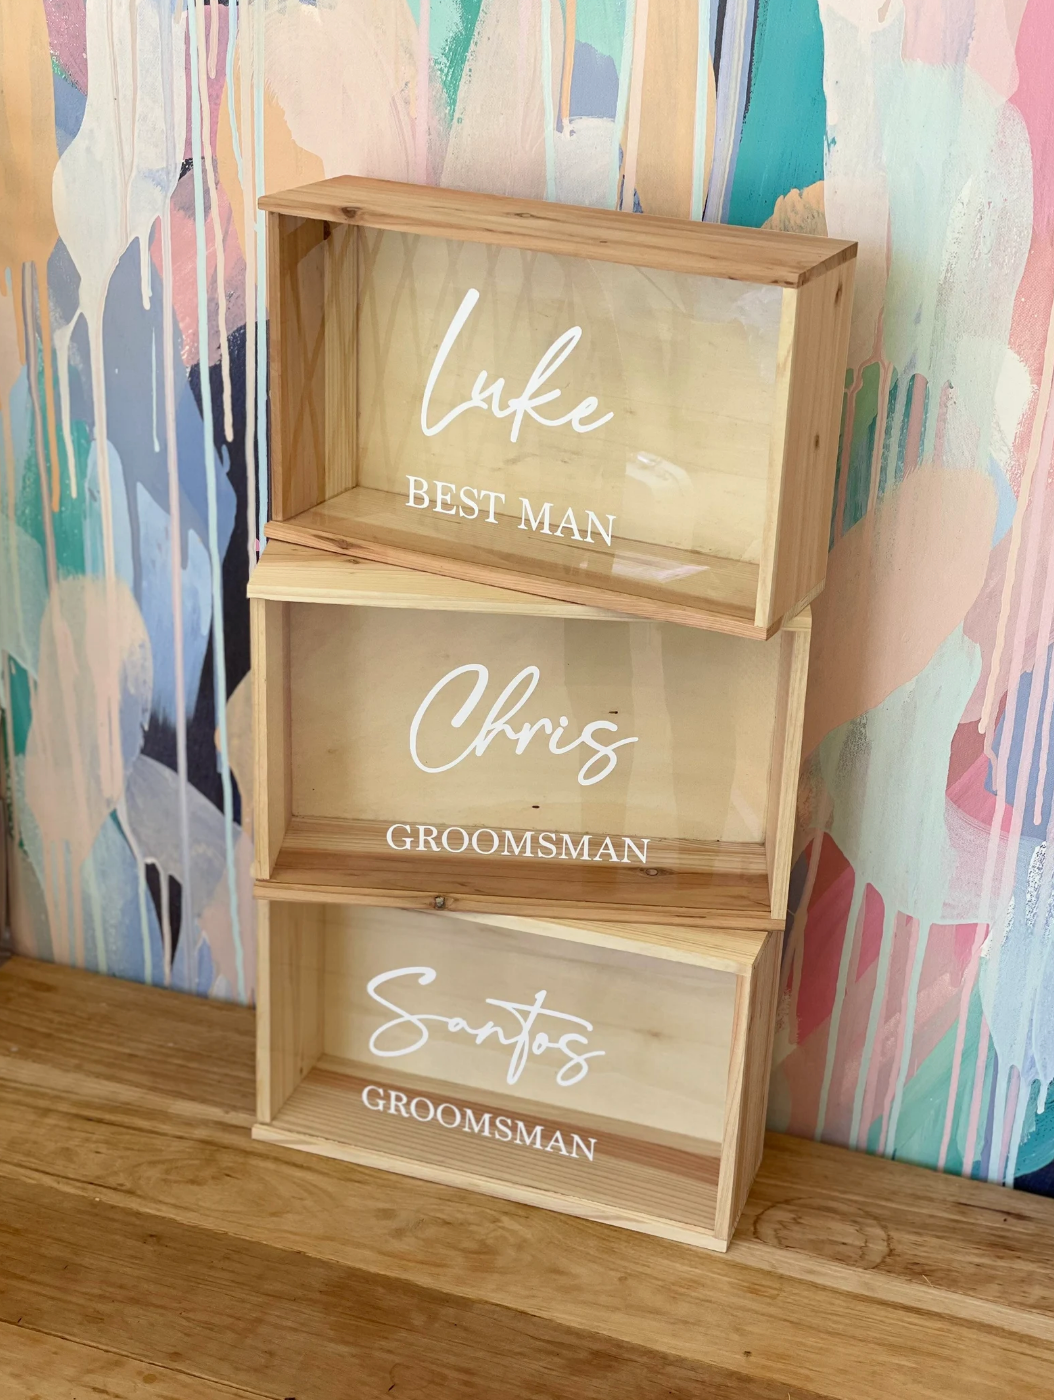 Timber wood personalised Keepsake Gift Box with Clear acrylic sliding lid